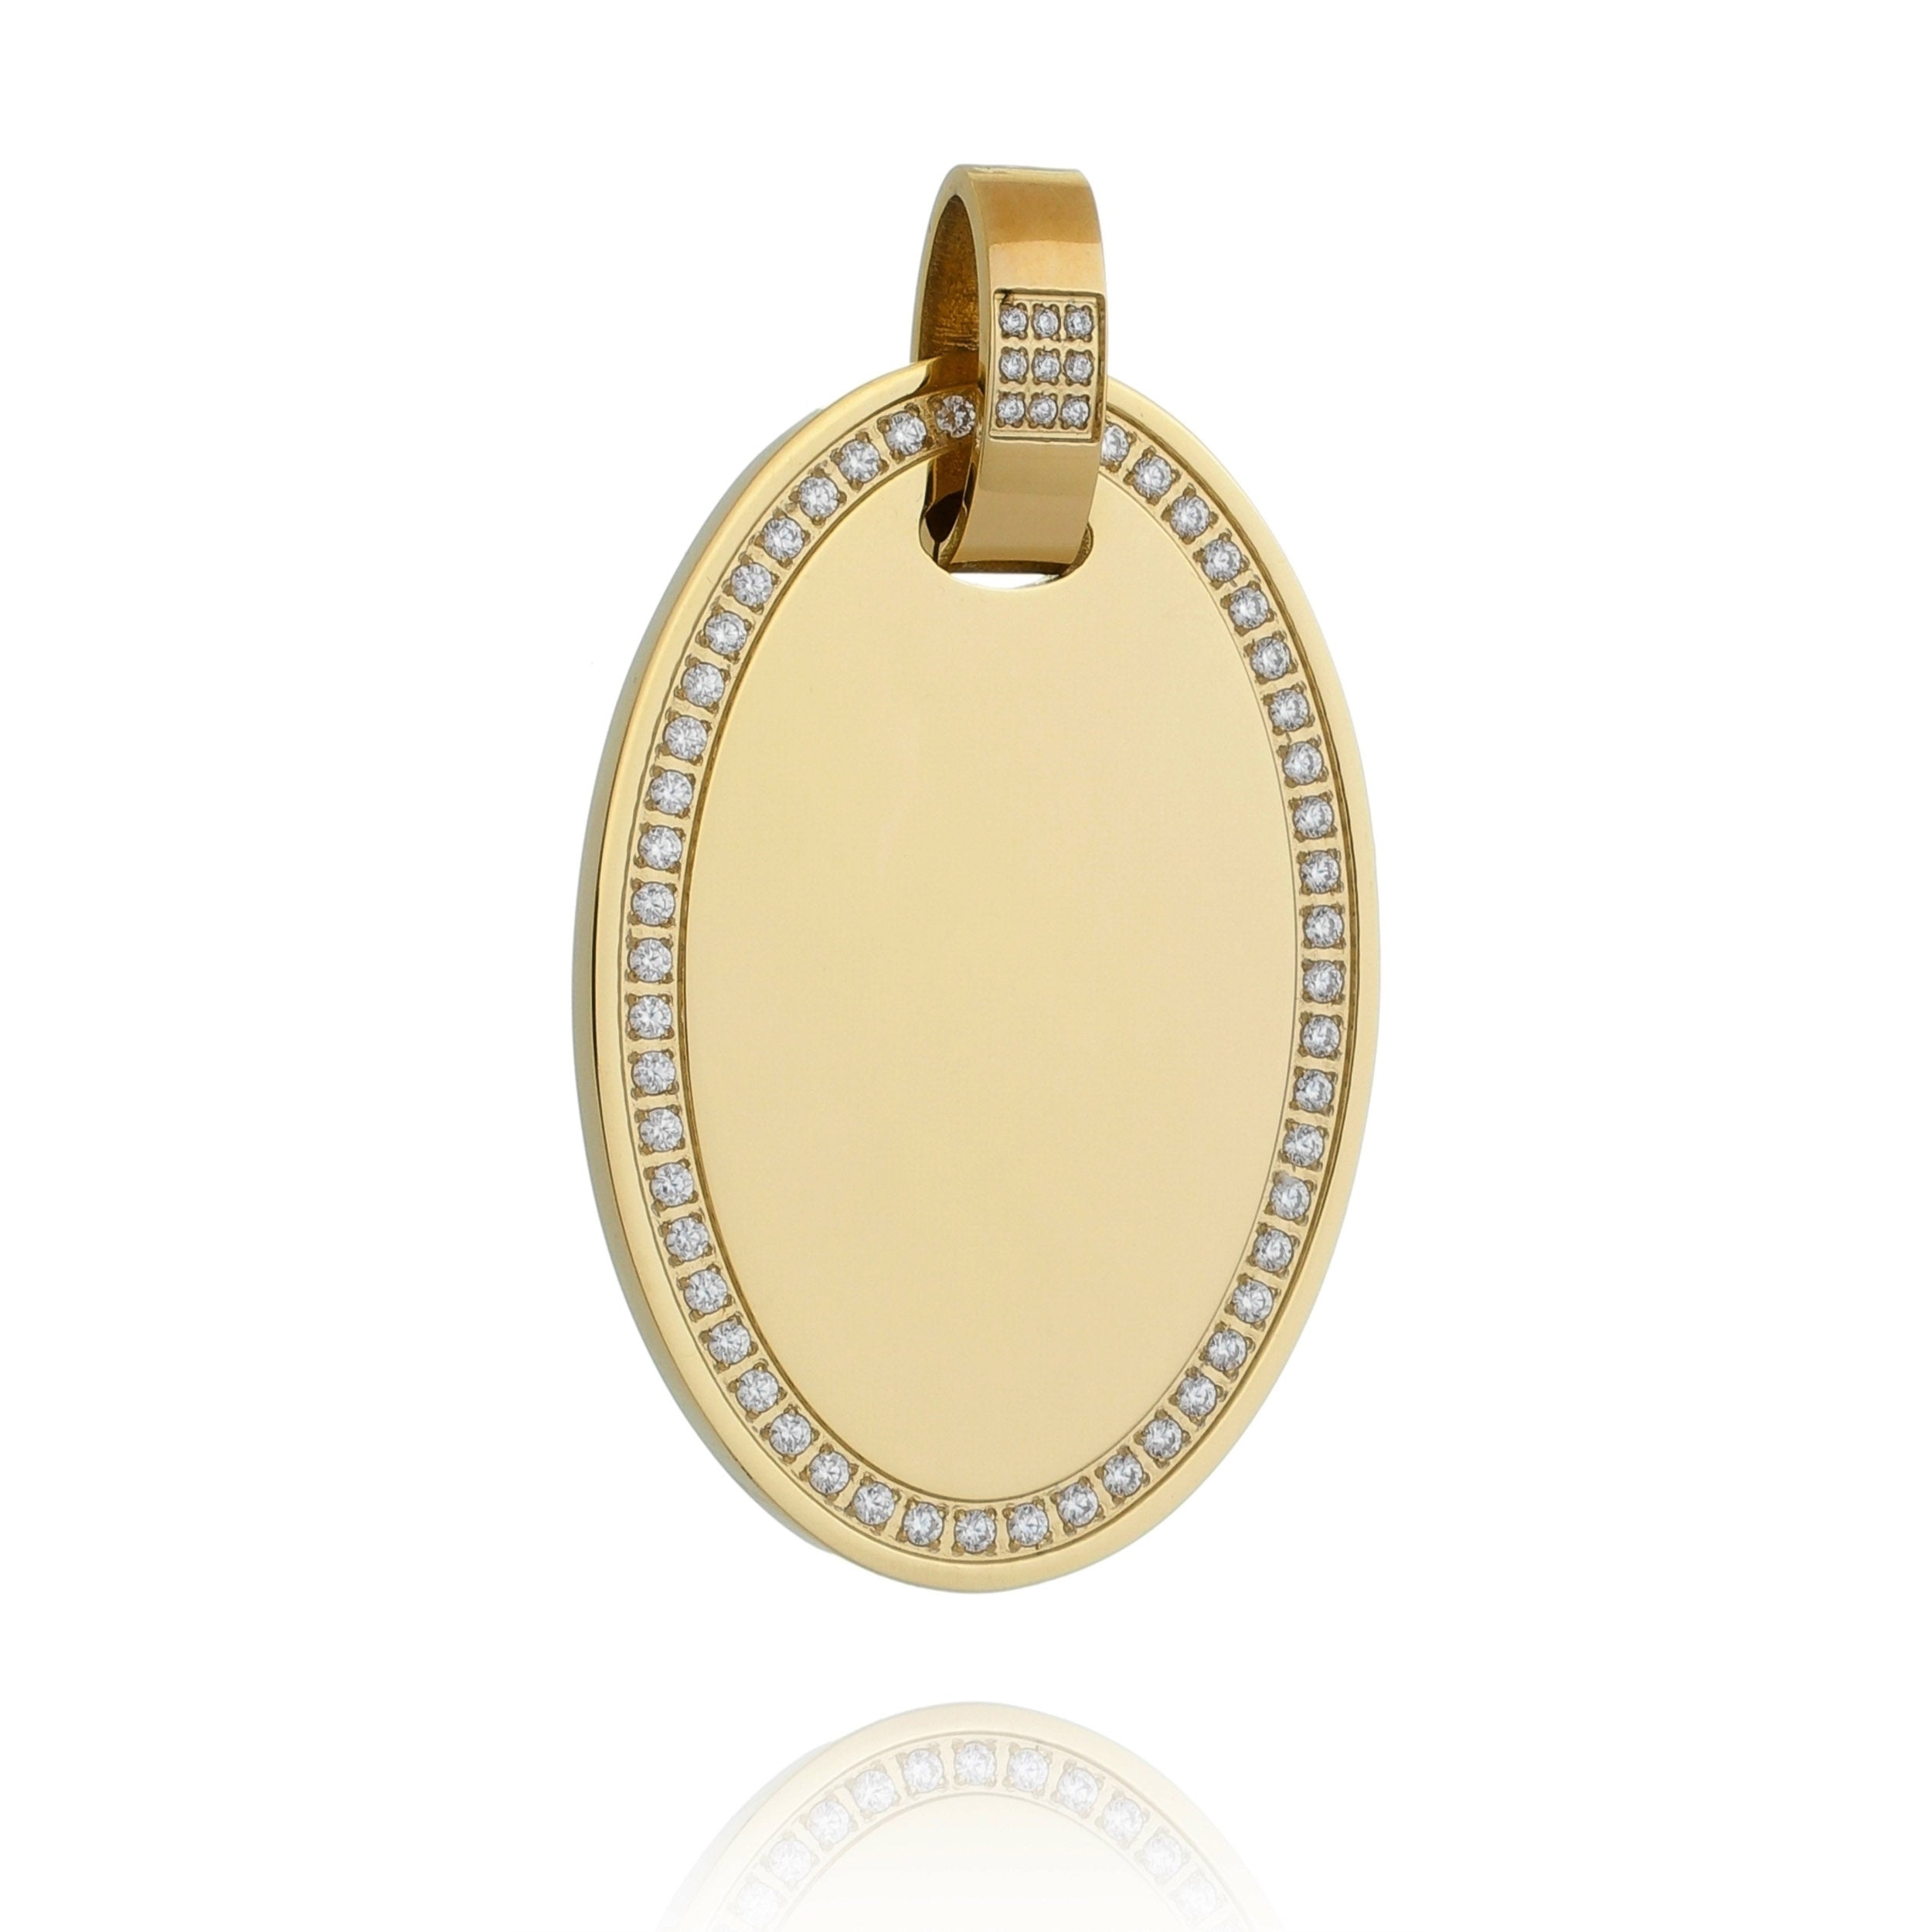 Engravable Oval Pendent - Cubic Zirconia. Available in both 18k Gold and Stainless Steel.